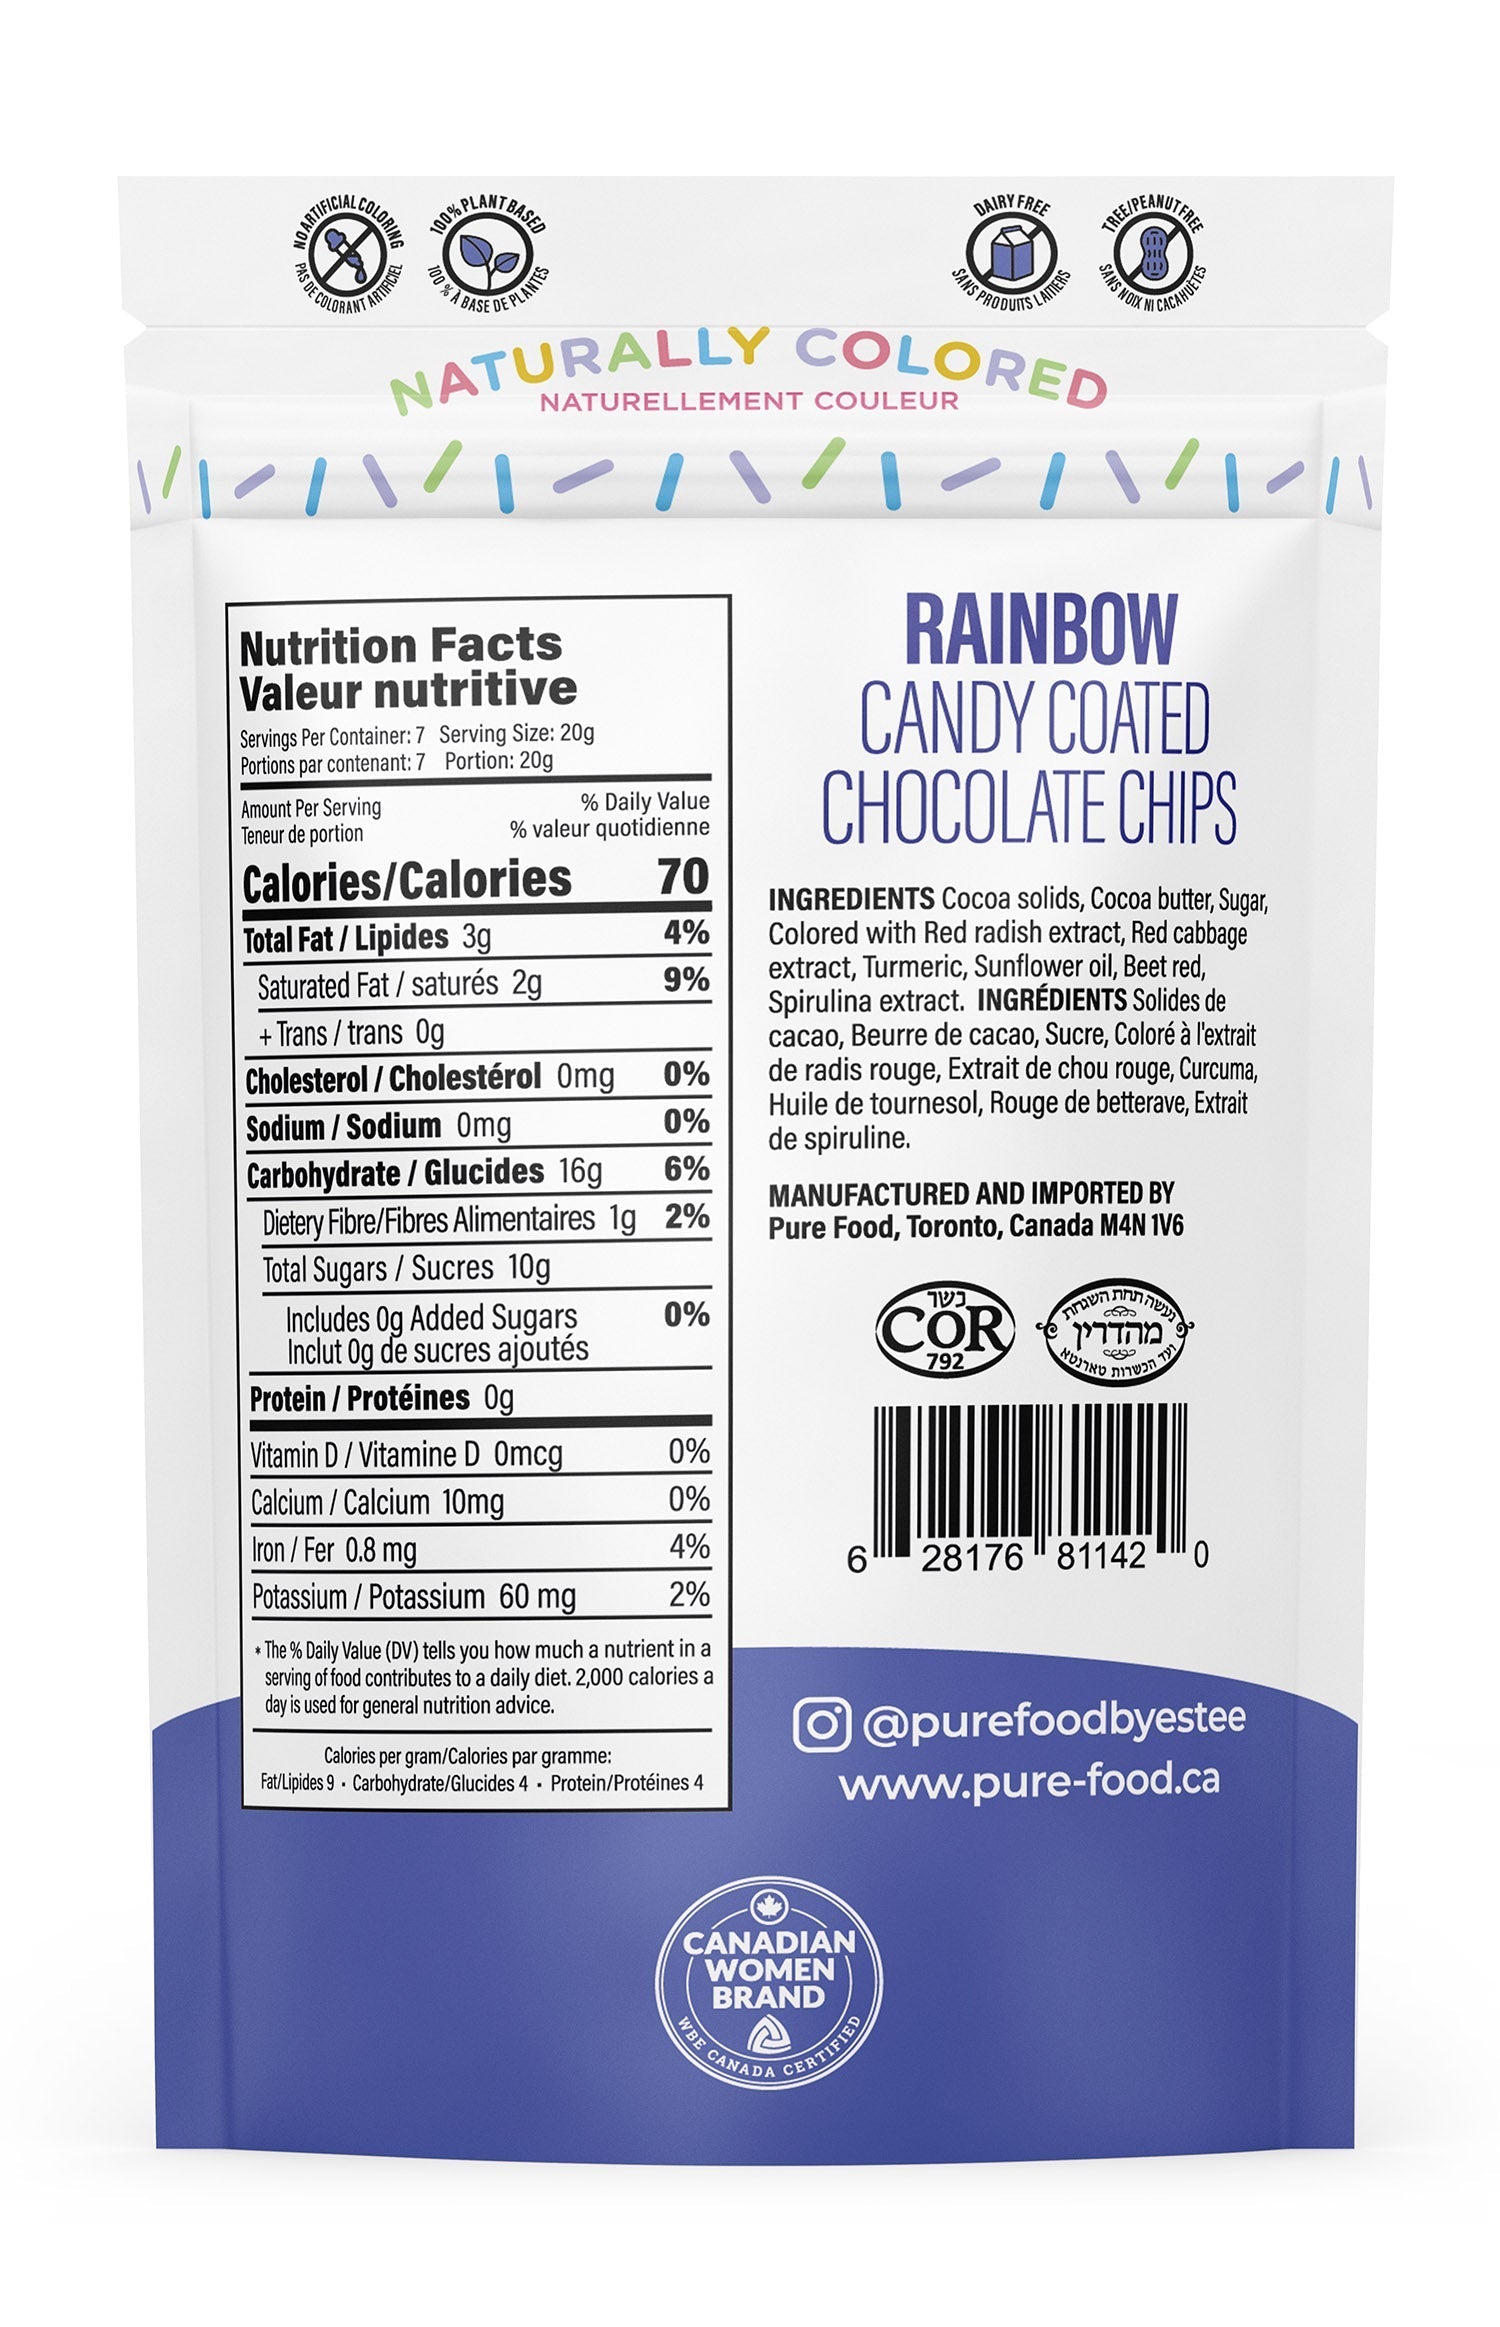 Rainbow All Natural Candy Coated Mini Chocolate Chips - 5 OZ - 3 Pack